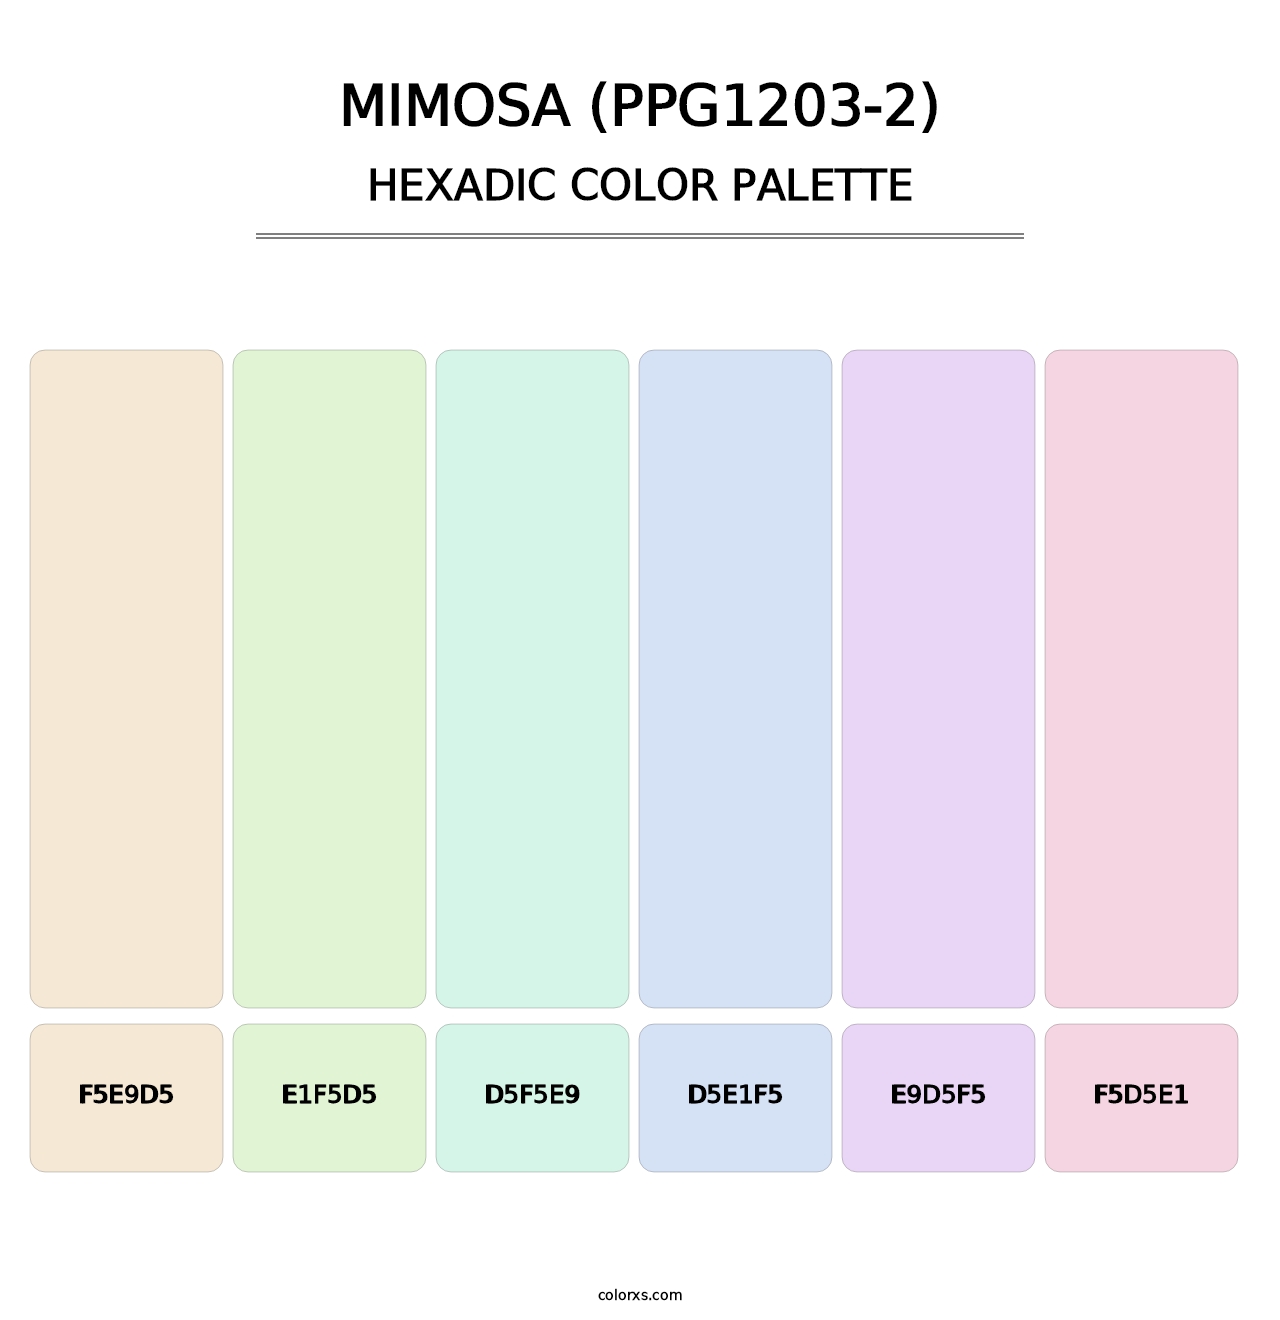 Mimosa (PPG1203-2) - Hexadic Color Palette